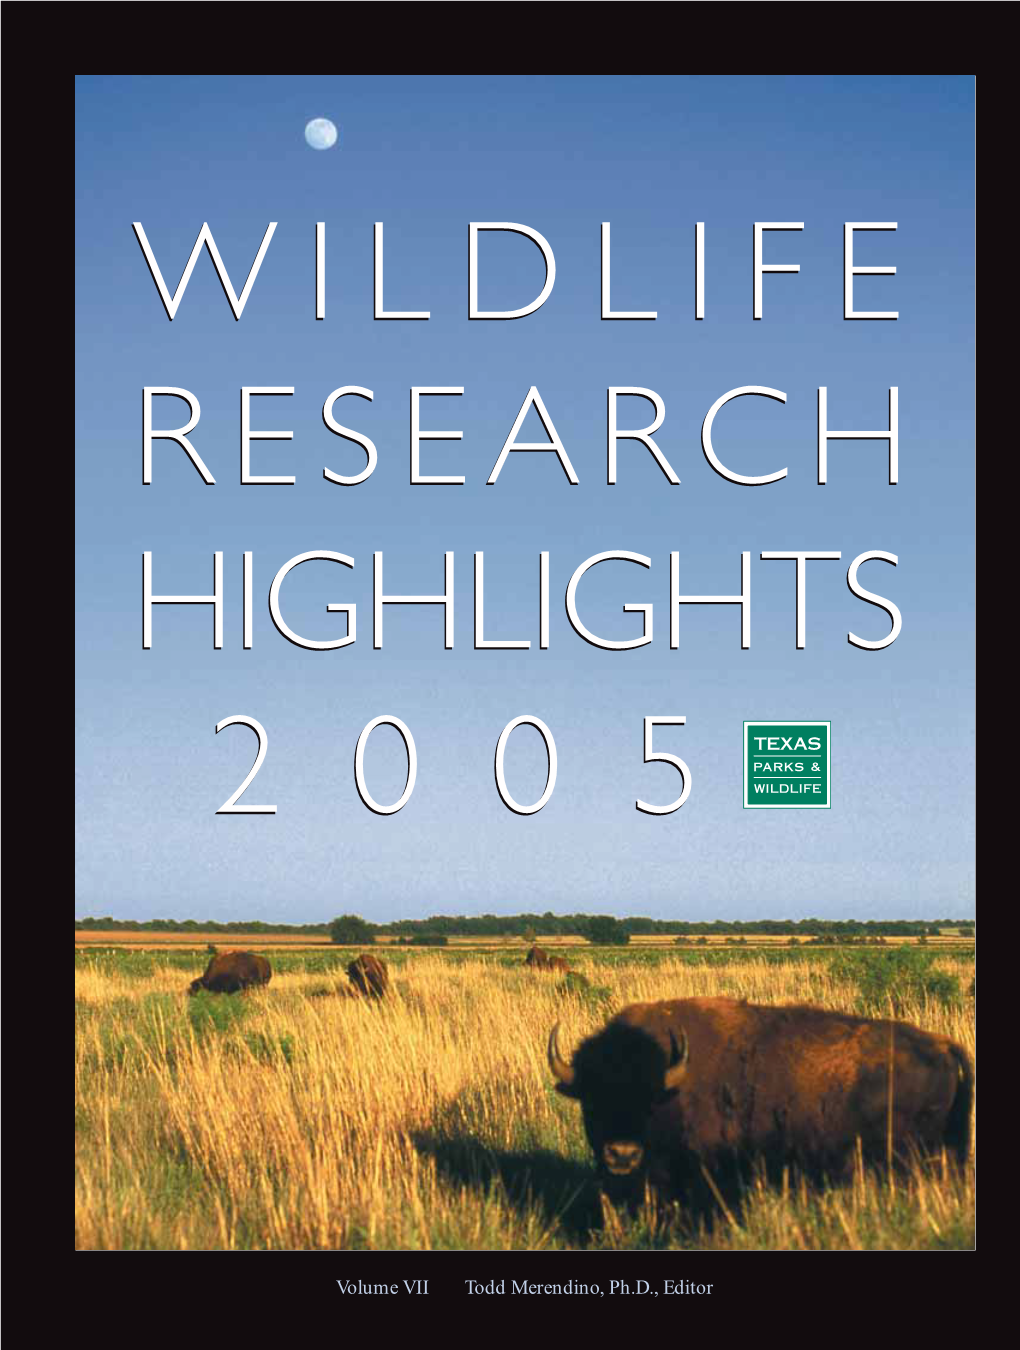 Wildlife Research Highlights 2005